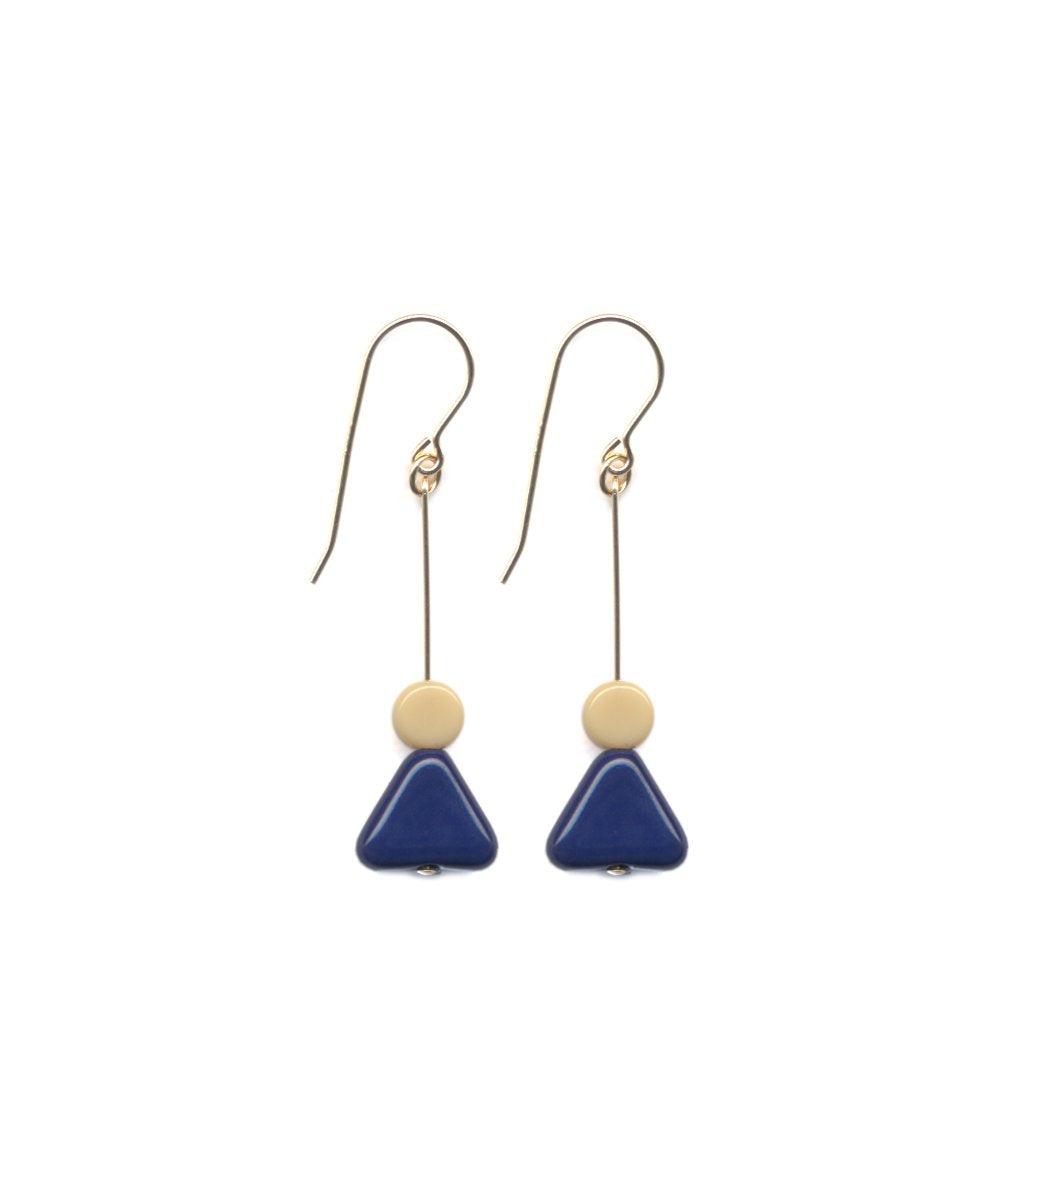 E1737 Navy Triangle with Cream Detail Earrings